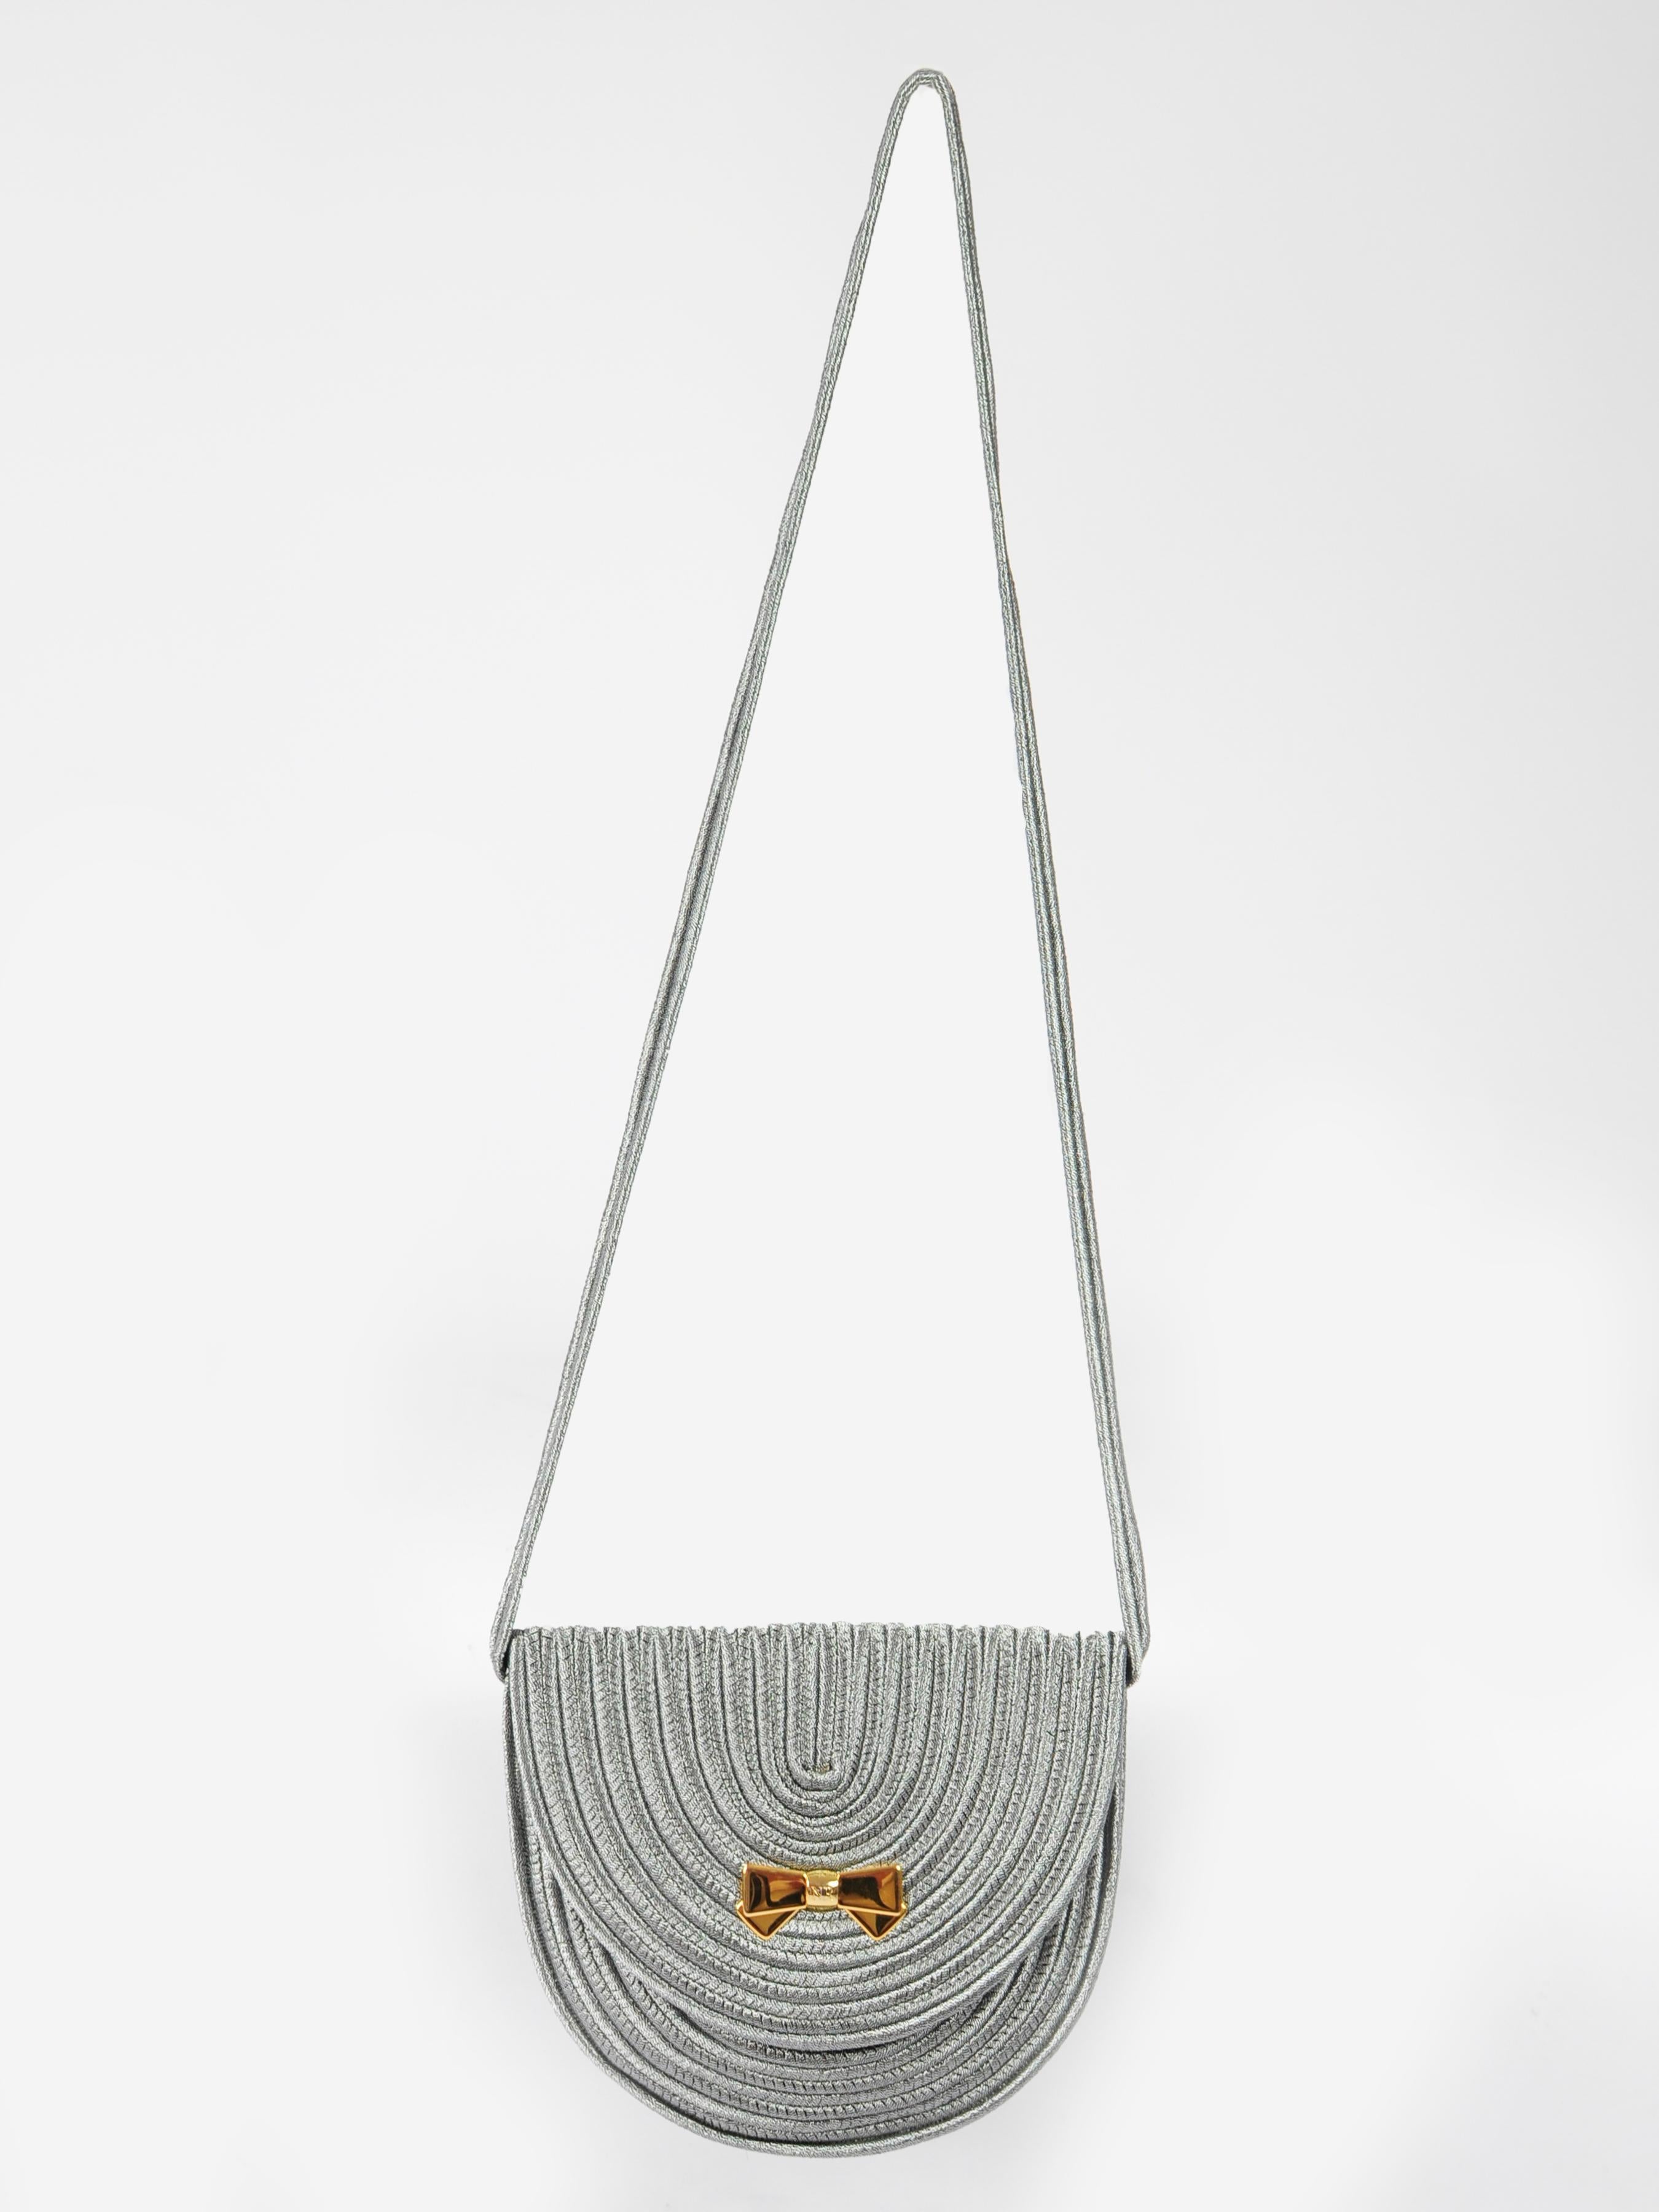 Nina Ricci Passementerie Bag from the 1980s in metallic silver with signature golden Nina Ricci bow shaped closure. Passementerie, a technique very known for it’s use in Yves Saint Laurent designs, is also a Nina Ricci favorite. The bag can be worn